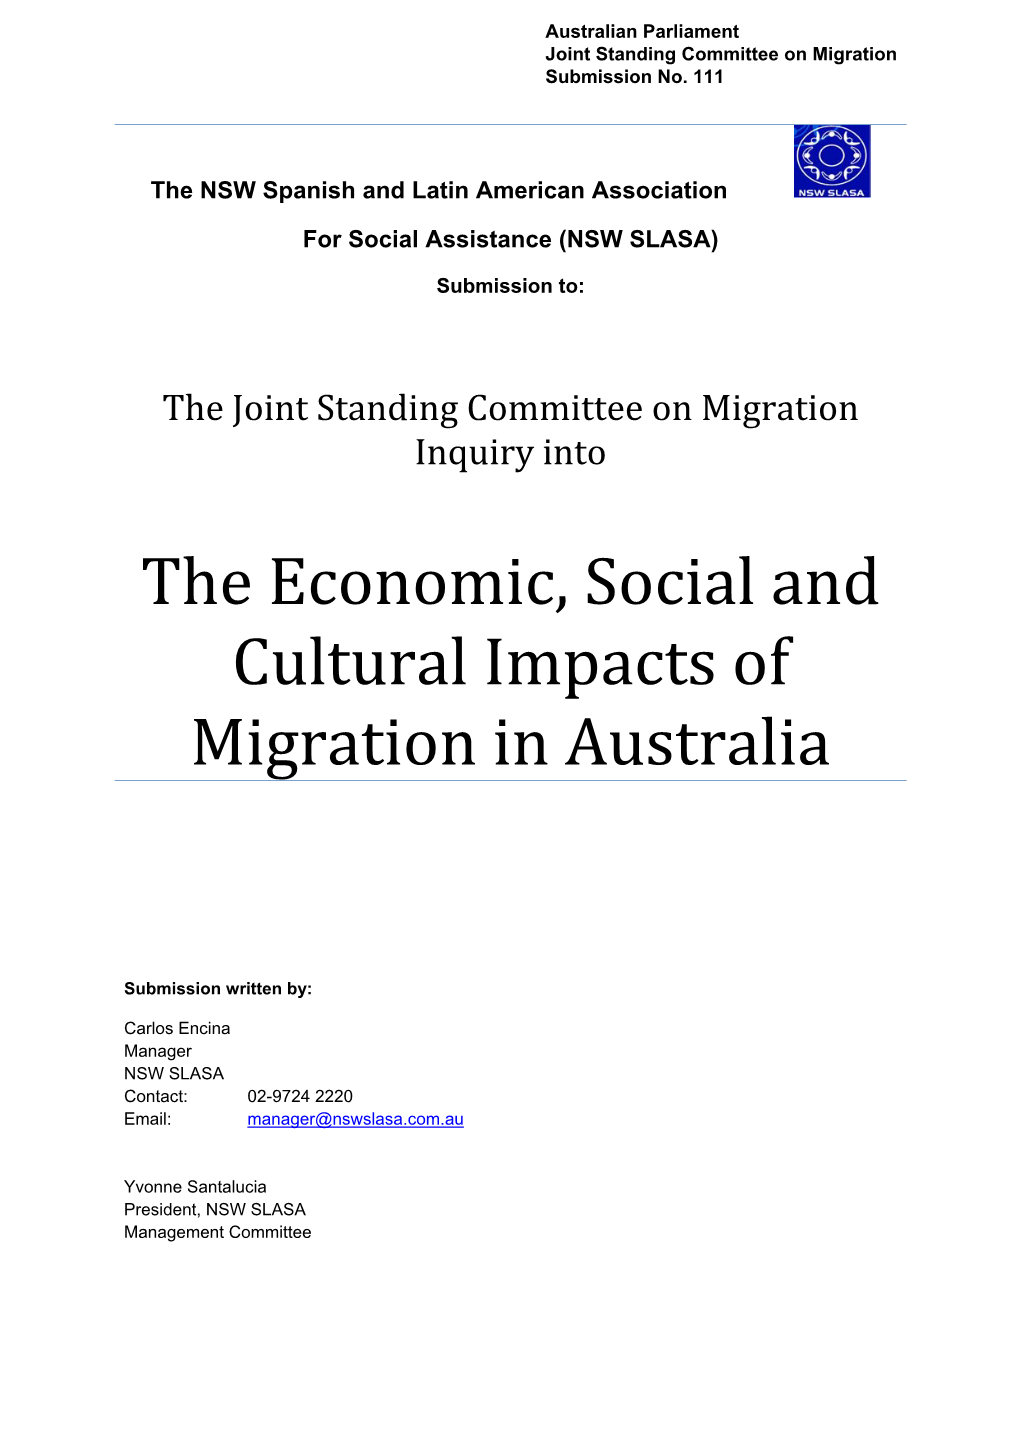 The Economic, Social and Cultural Impacts of Migration in Australia